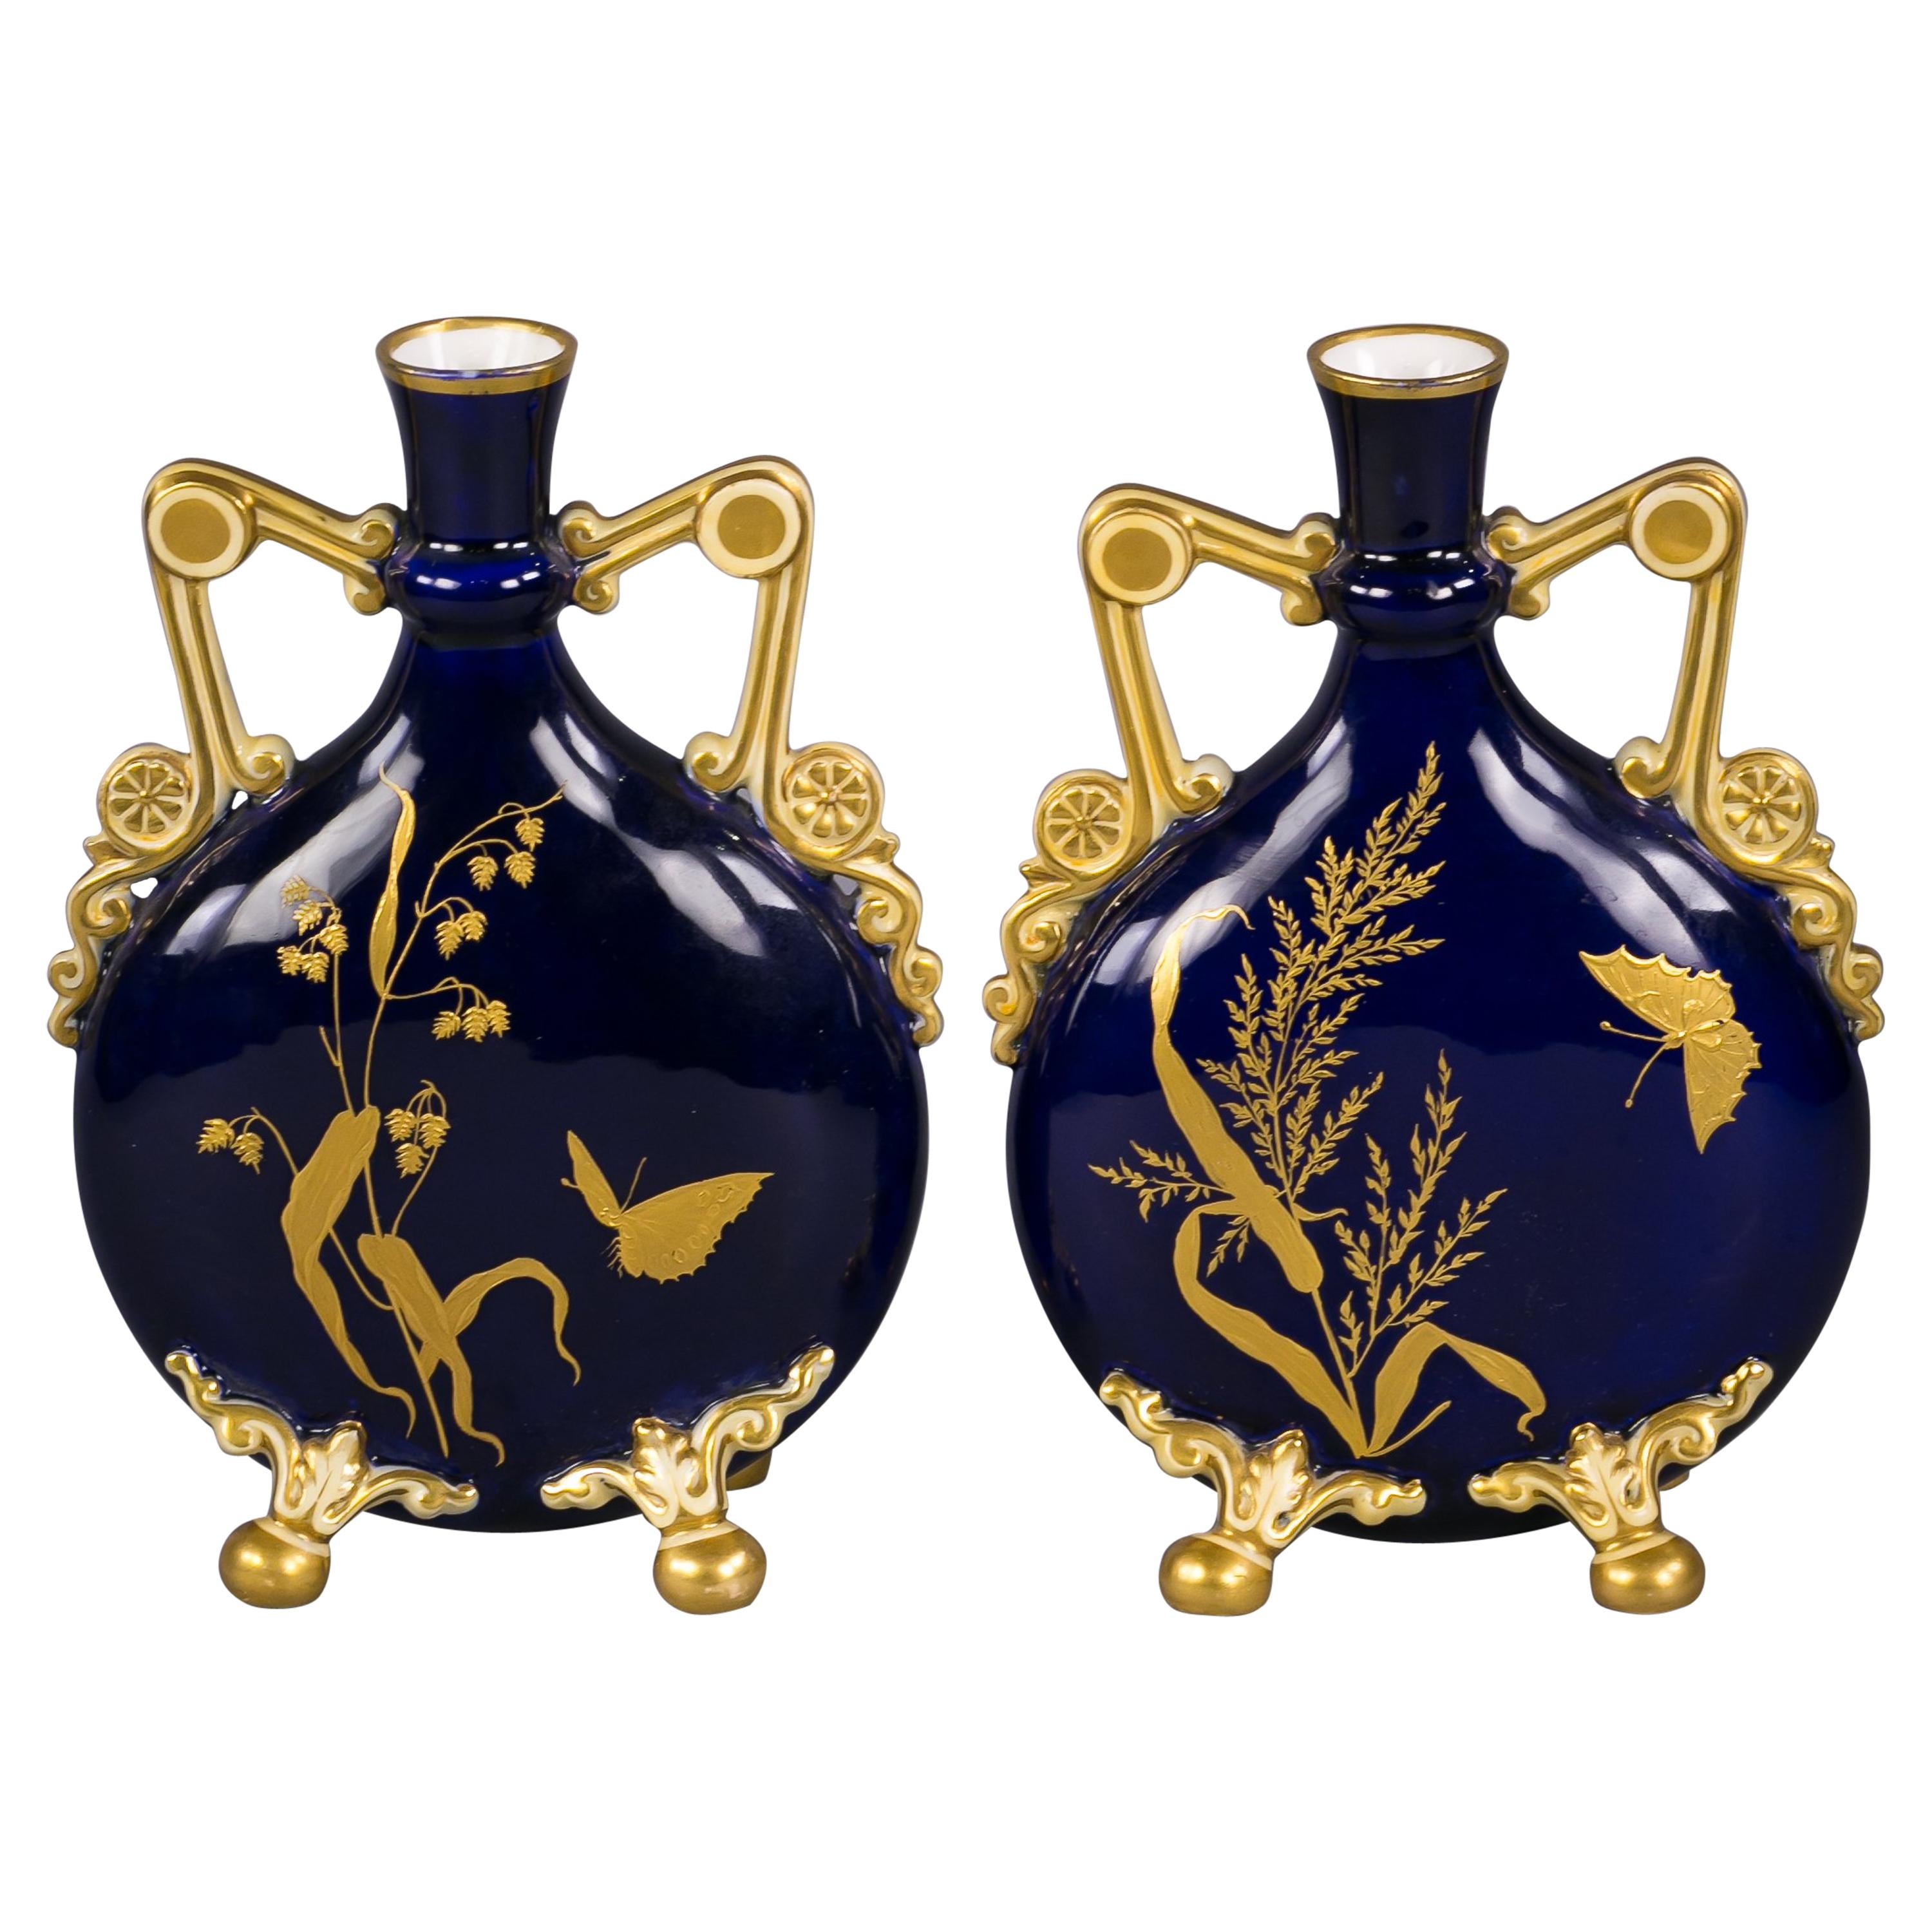 Pair of English Porcelain Two-Handled Moon Flask Vases, circa 1880